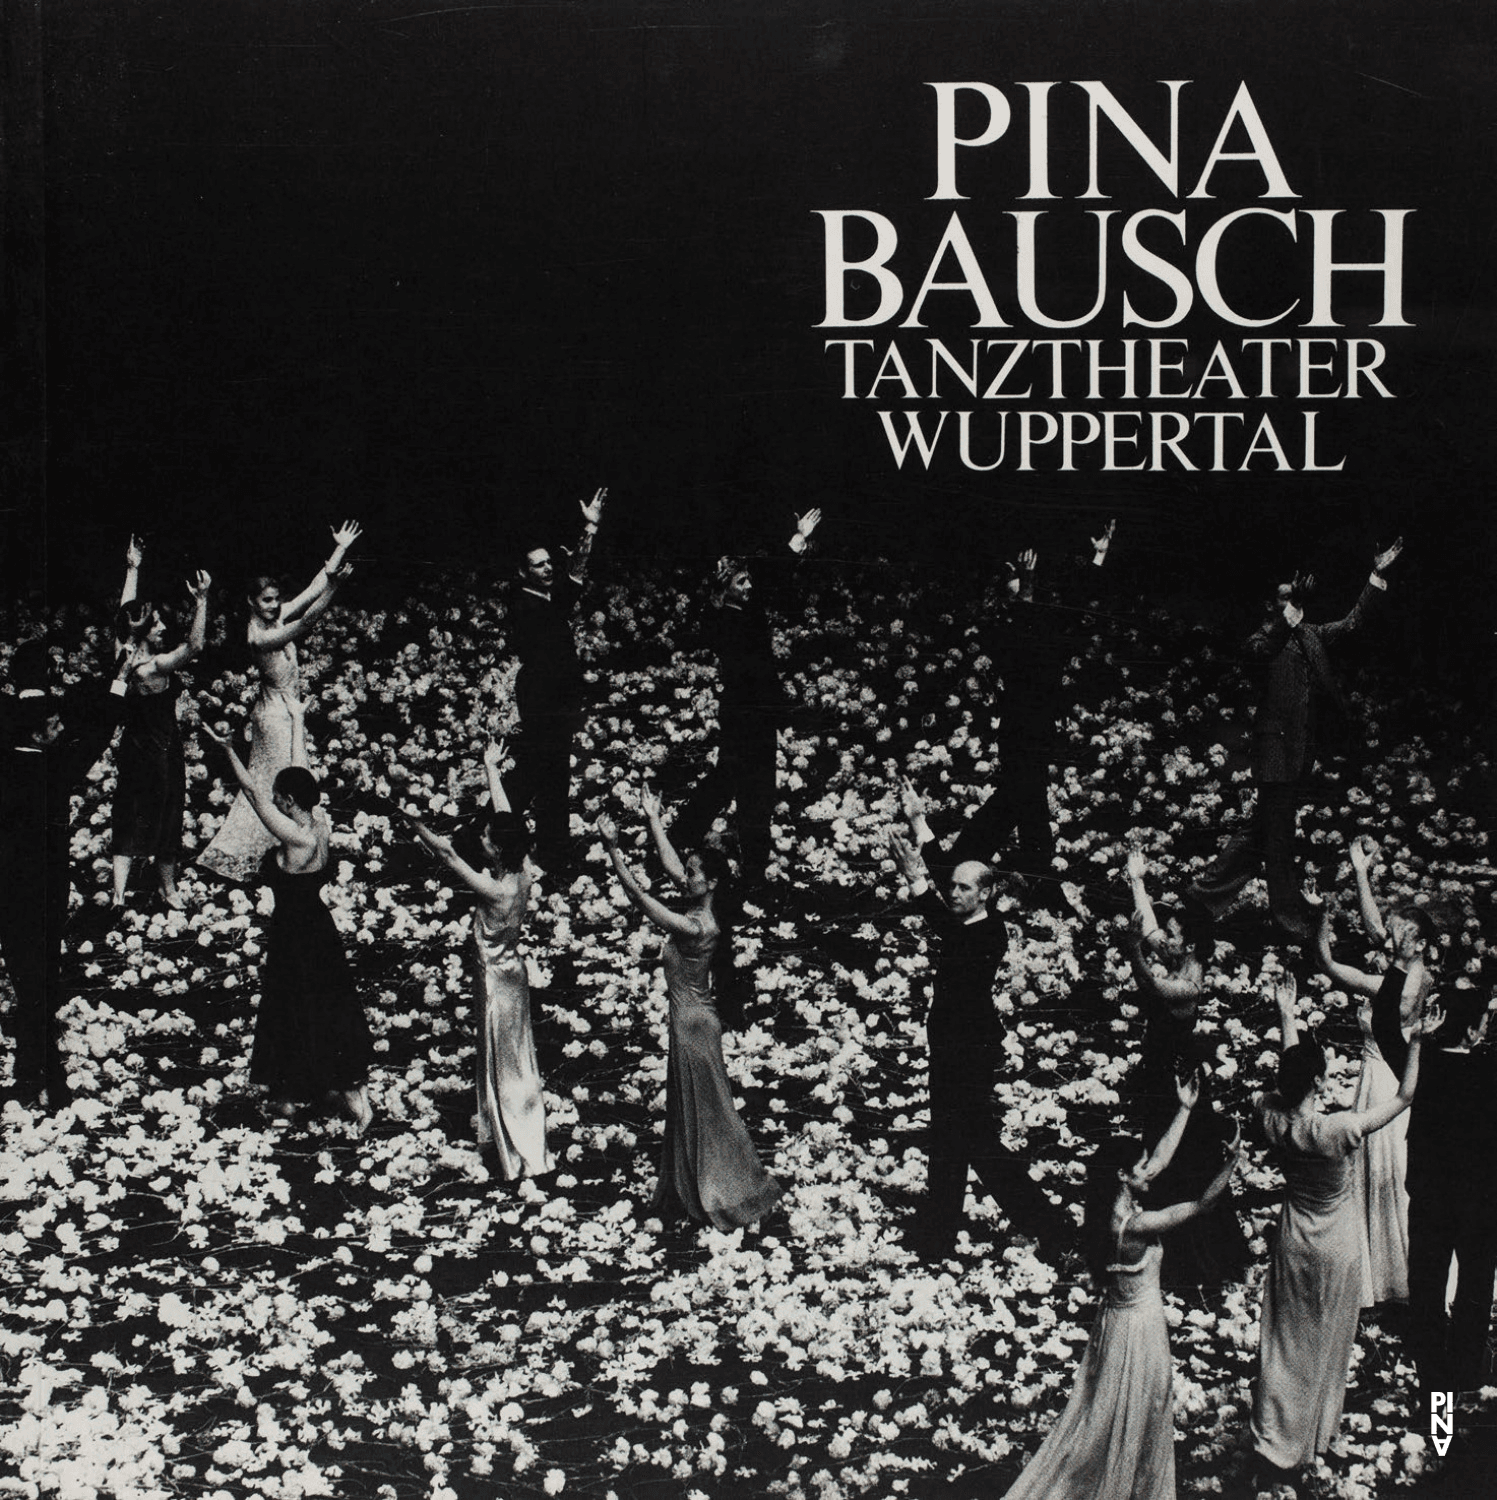 Booklet for “Nelken (Carnations)” by Pina Bausch with Tanztheater Wuppertal in in Kyoto, Osaka, Tokyo and Yokohama, 09/06/1989 – 09/17/1989